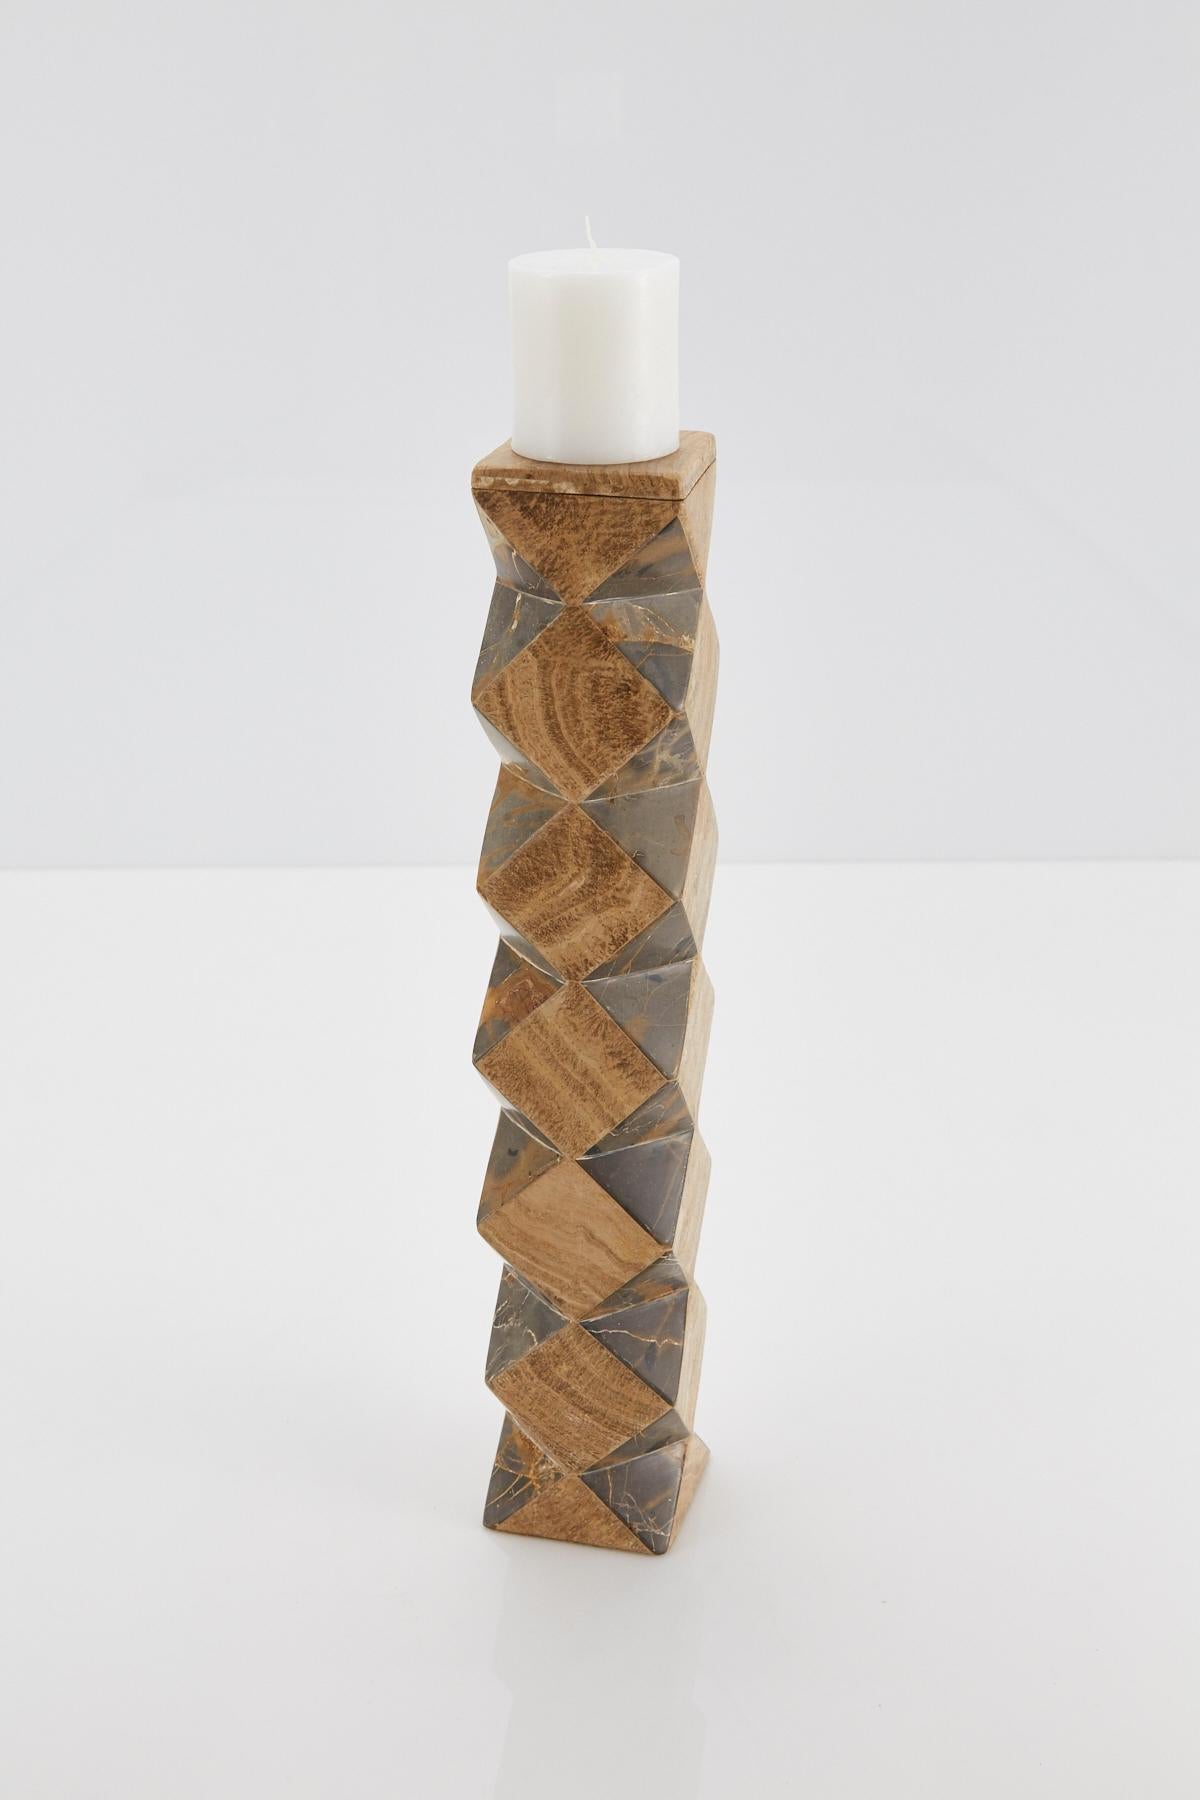 Tall pillar candle holder. Body is comprised of a rectilinear cube with faceted sides, alternating snakeskin stone and beige tessellated stone. The top of this convertible candlestick is removable and can then be used as a vase.

Coordinating short